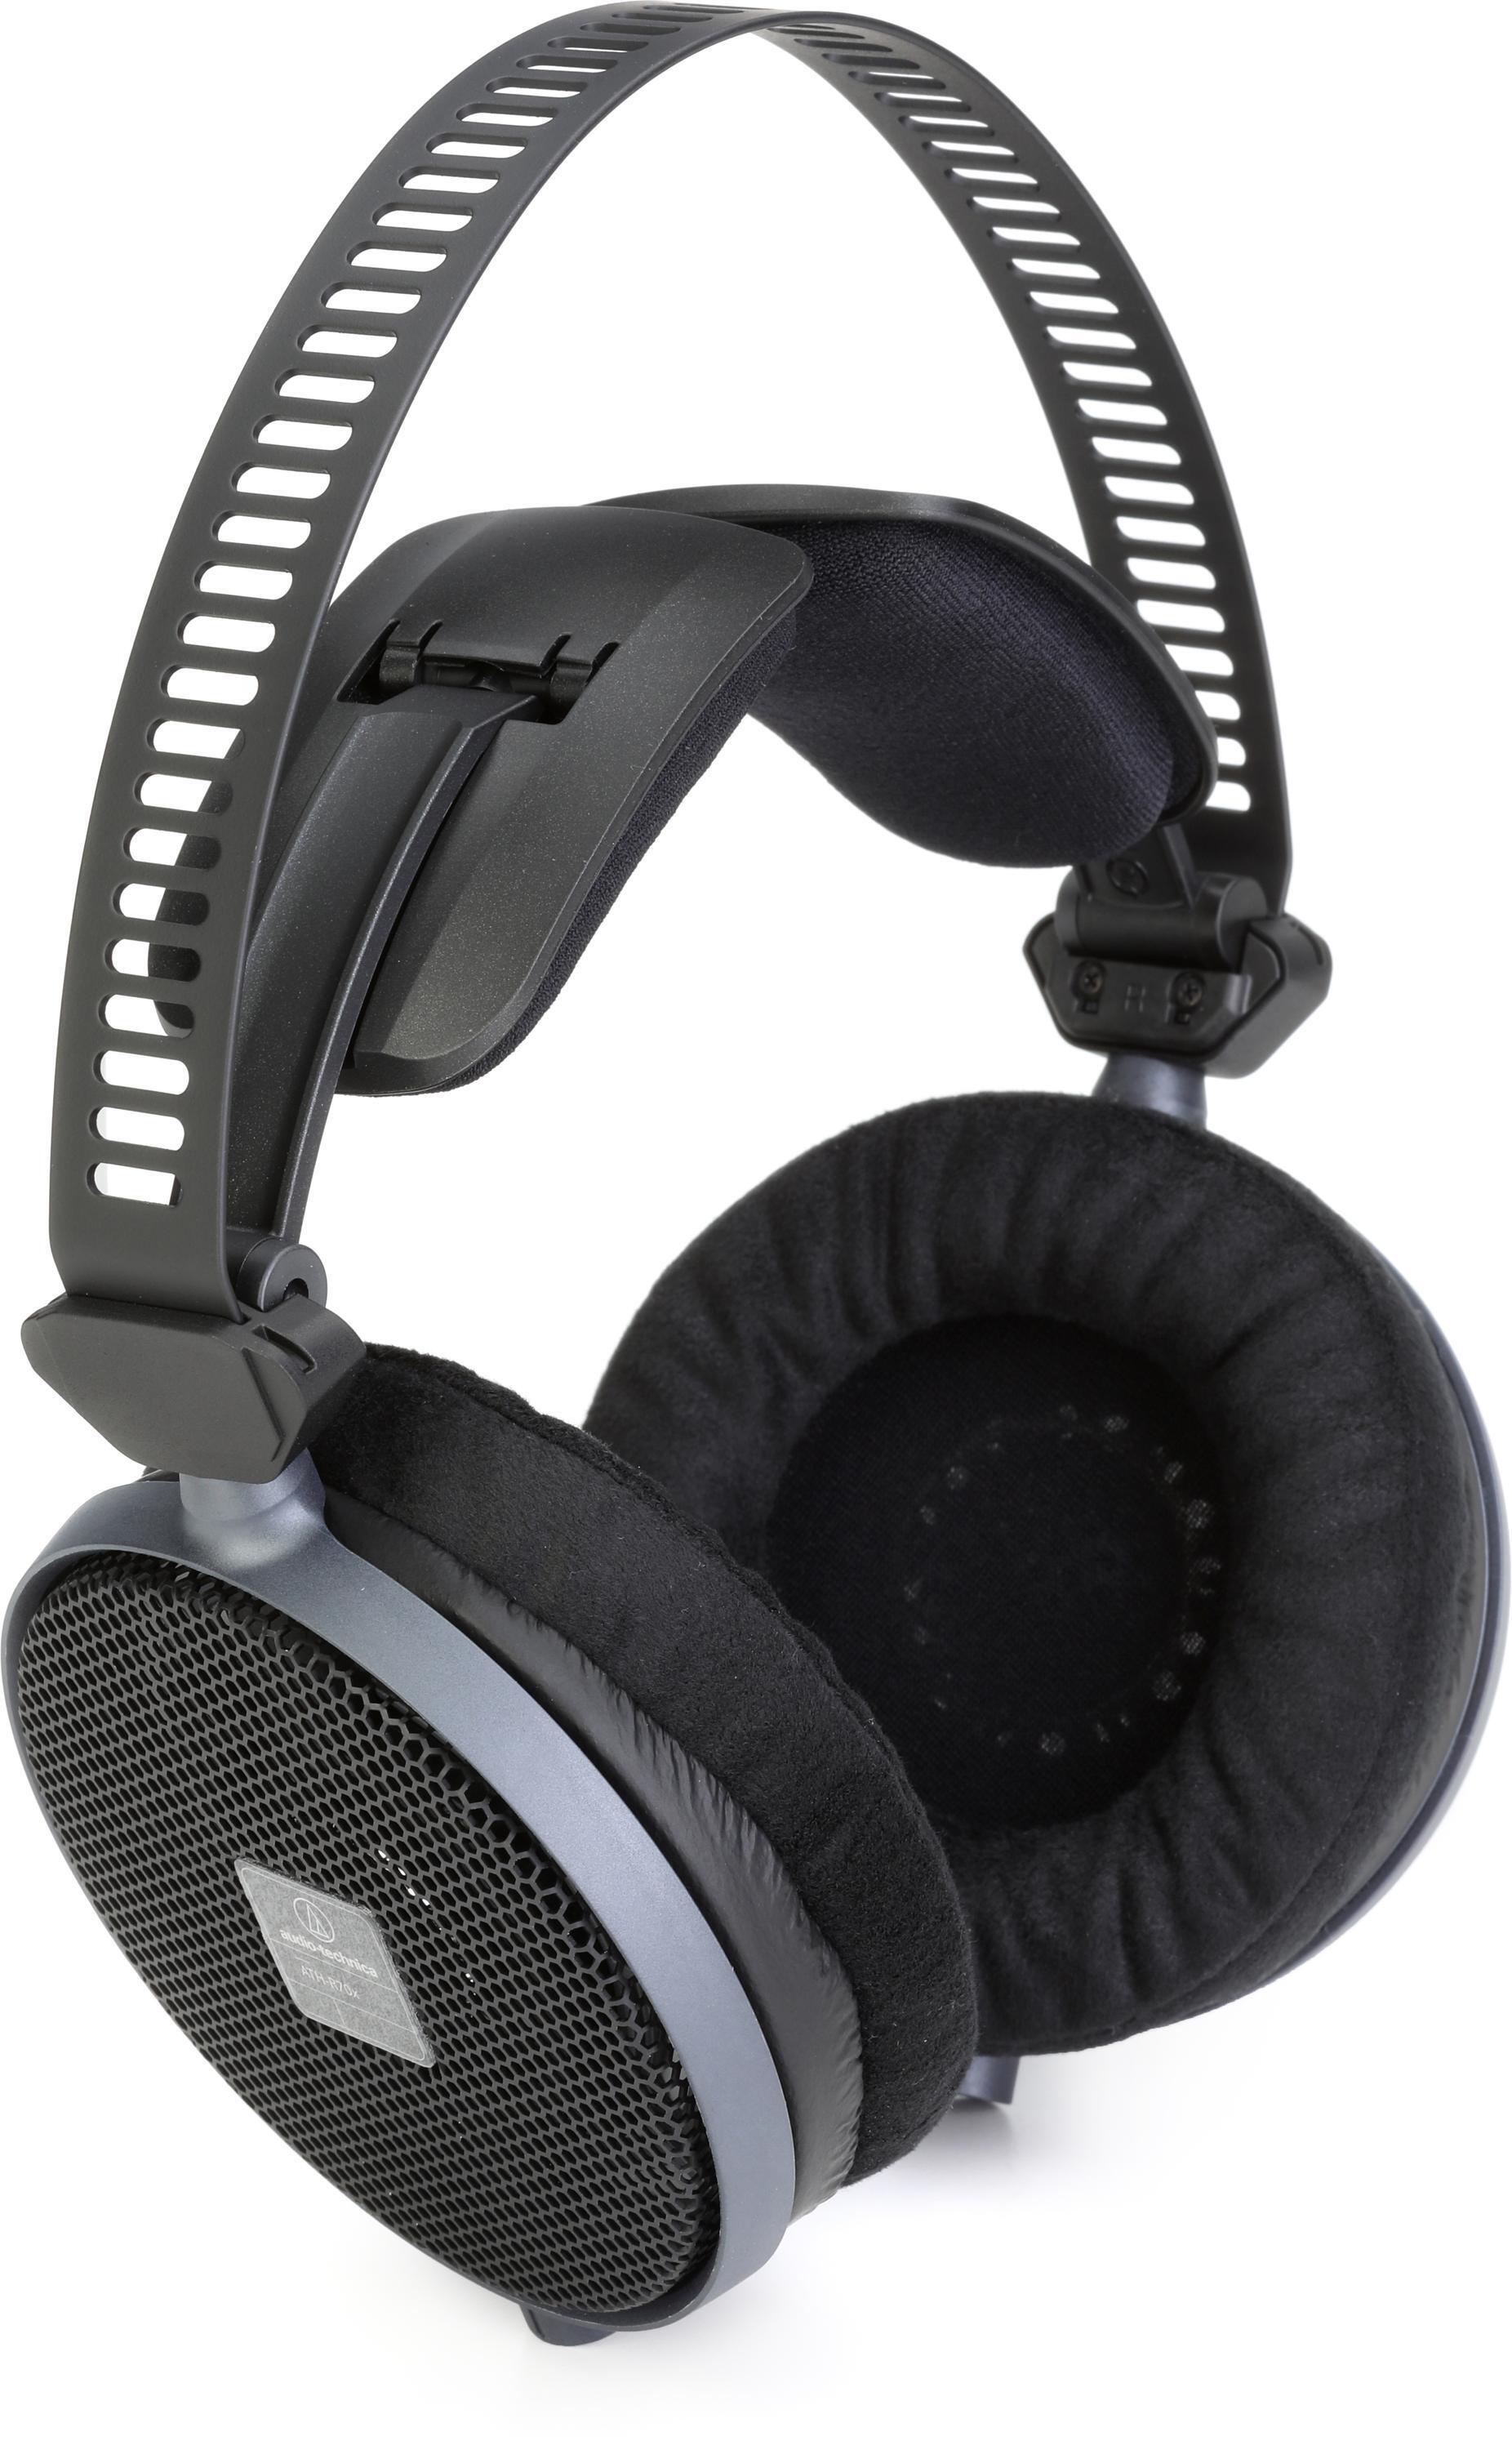 Audio-Technica ATH-R70x Open-back Dynamic Reference Headphone